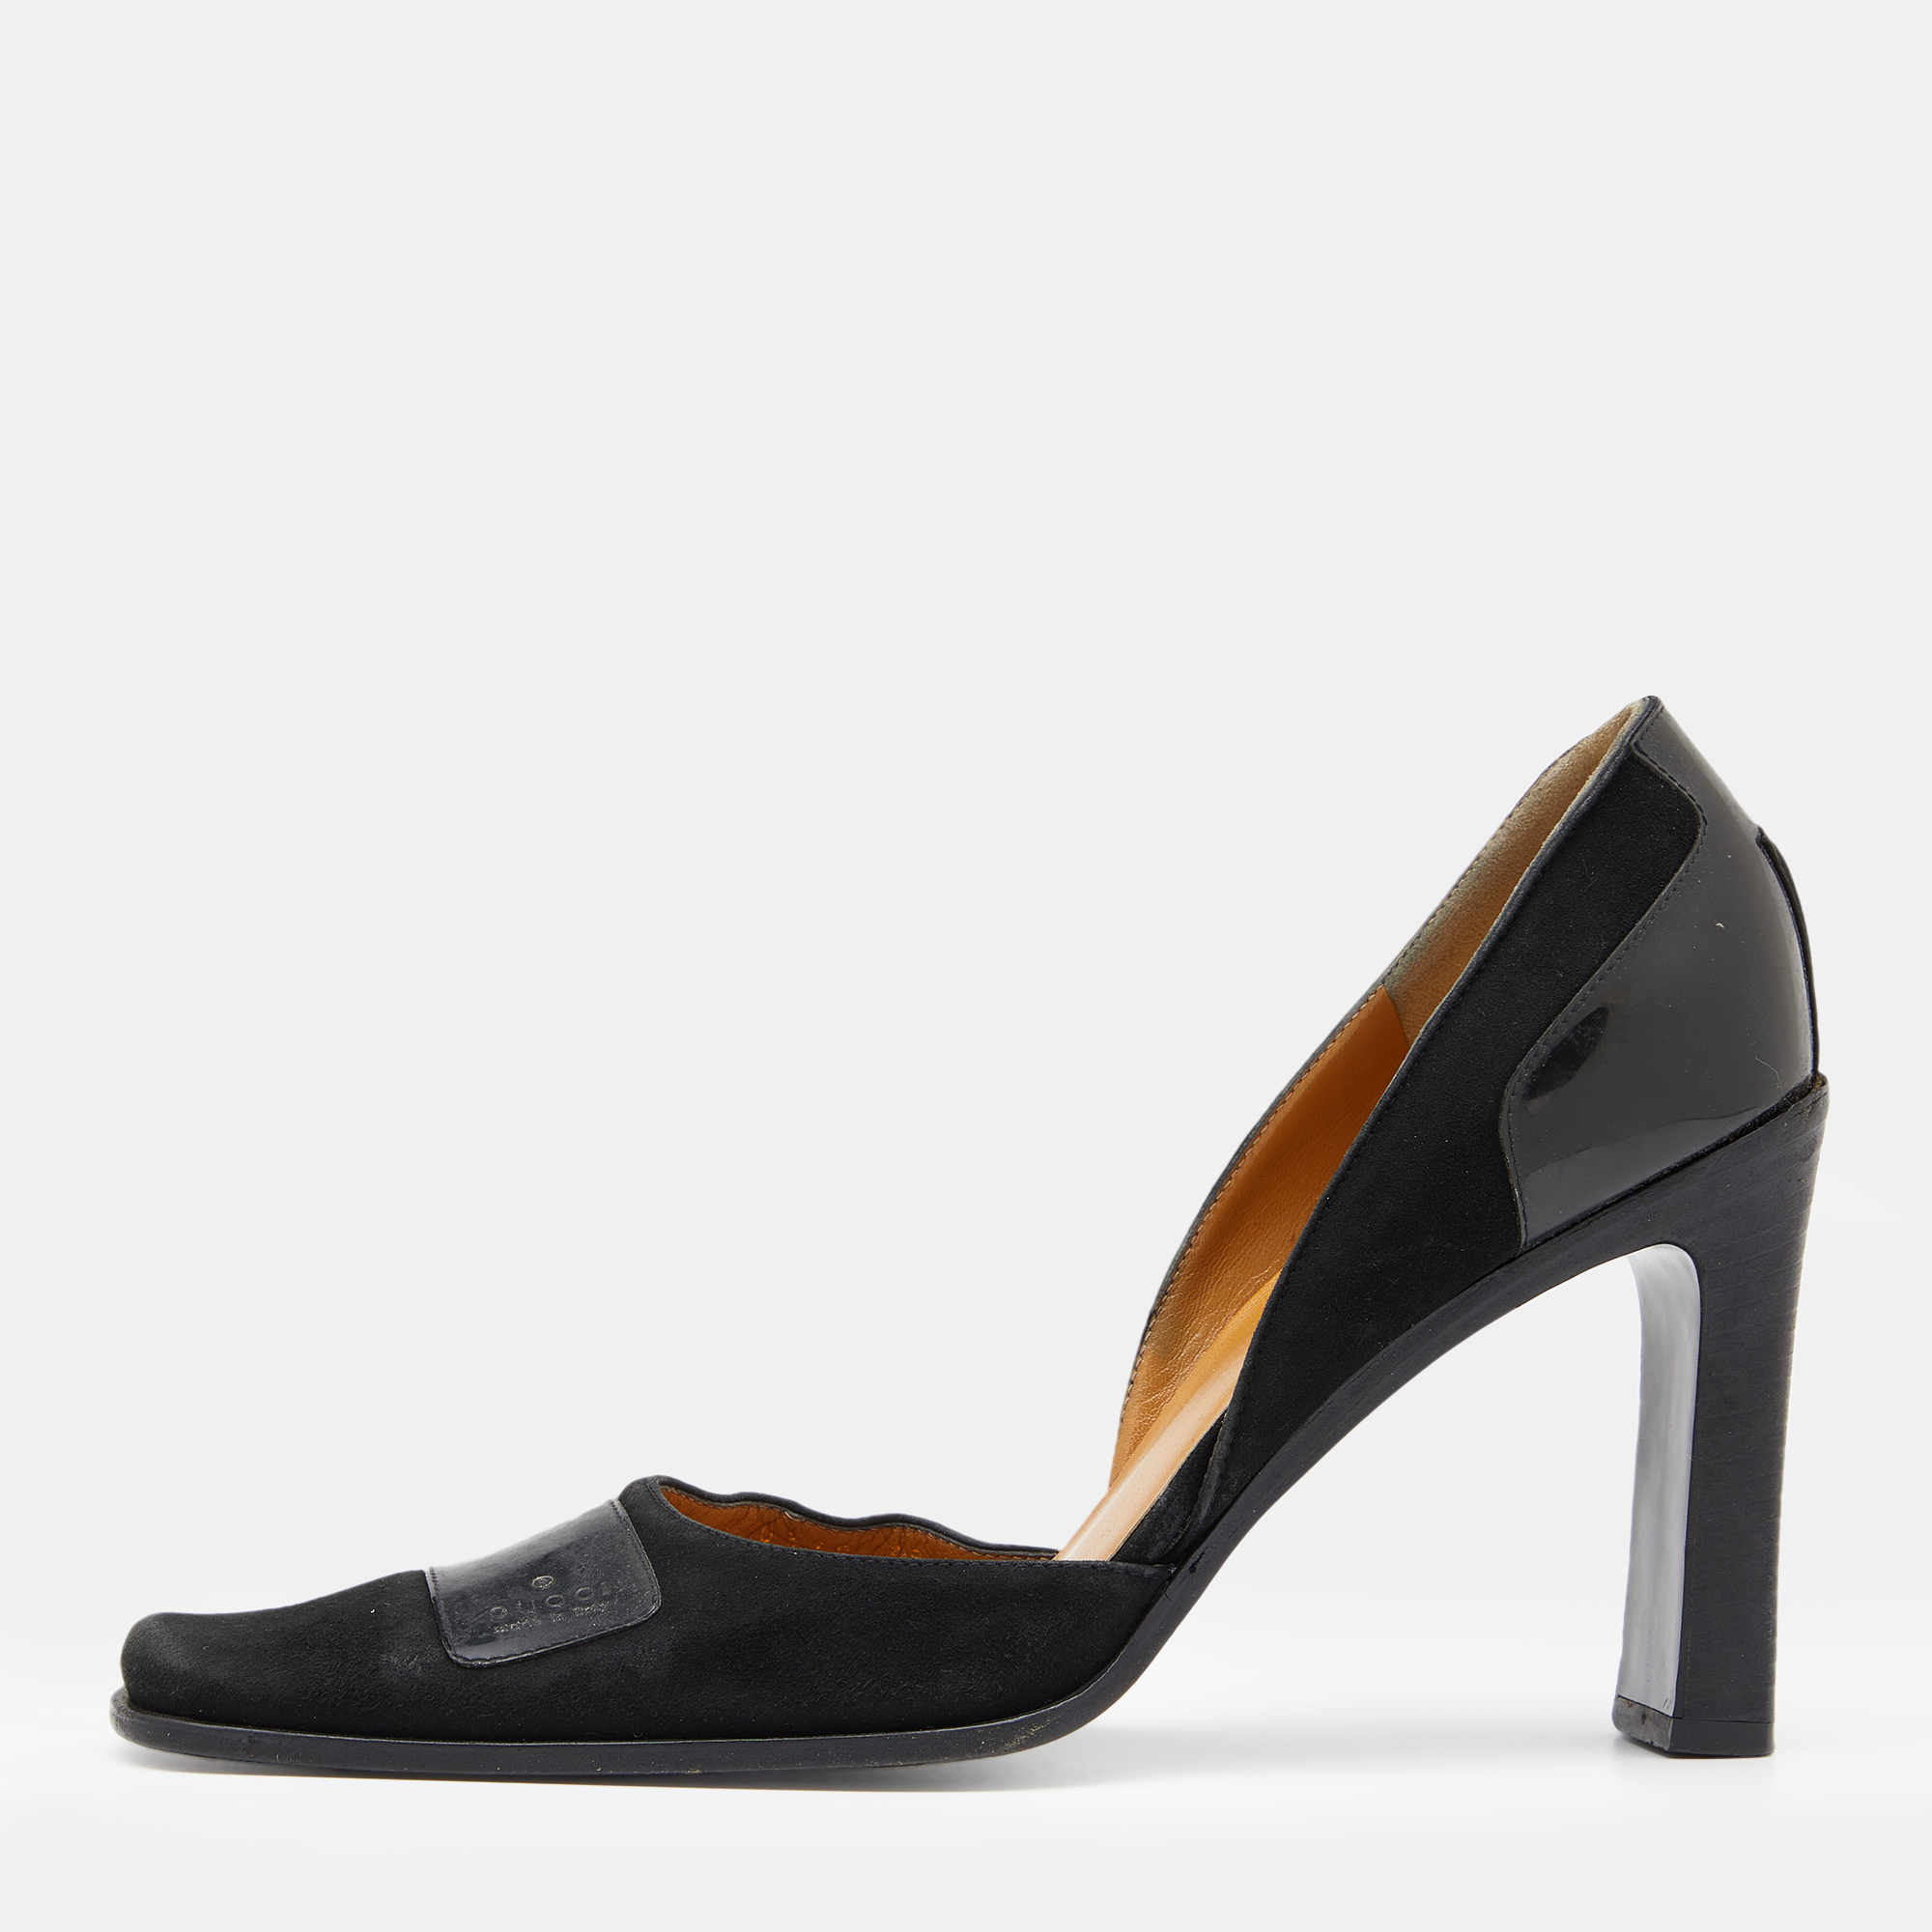 This pair of Gucci pumps is the perfect inspiration for a stylish look. Created from suede and patent leather it features square toes brand detailing on the front and 9.5cm heels.